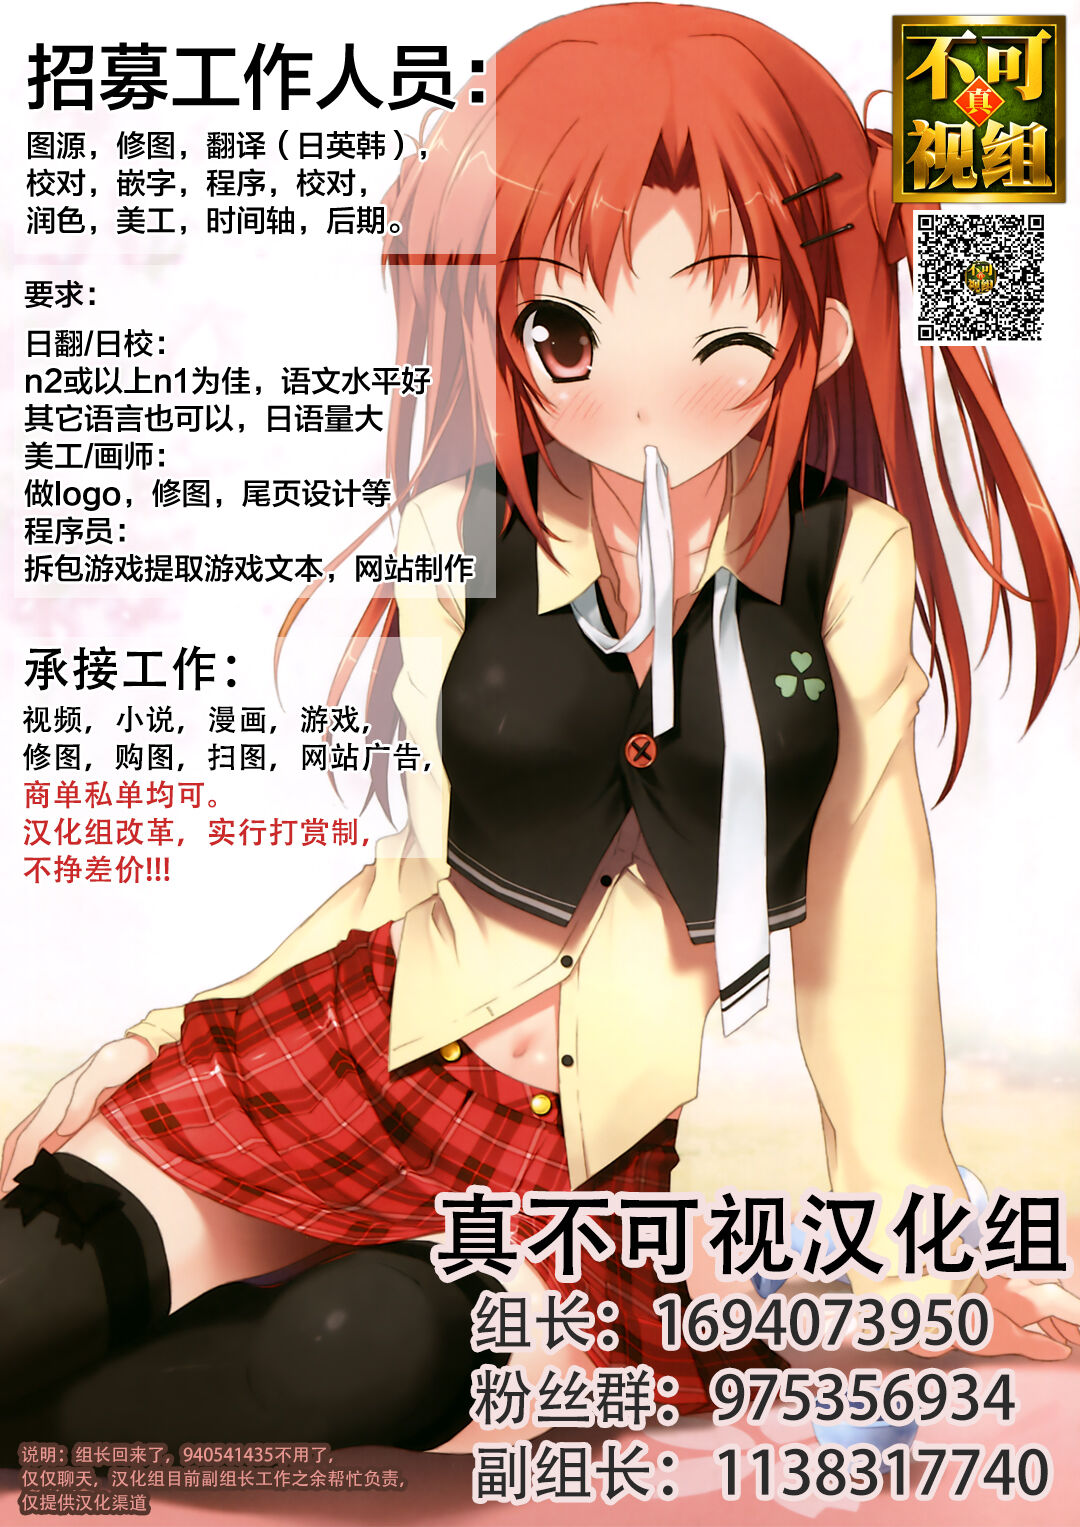 [Thingsmart] Flip Side [Chinese] [逃亡者×真不可视汉化组] [Thingsmart] Flip Side [中国翻訳]